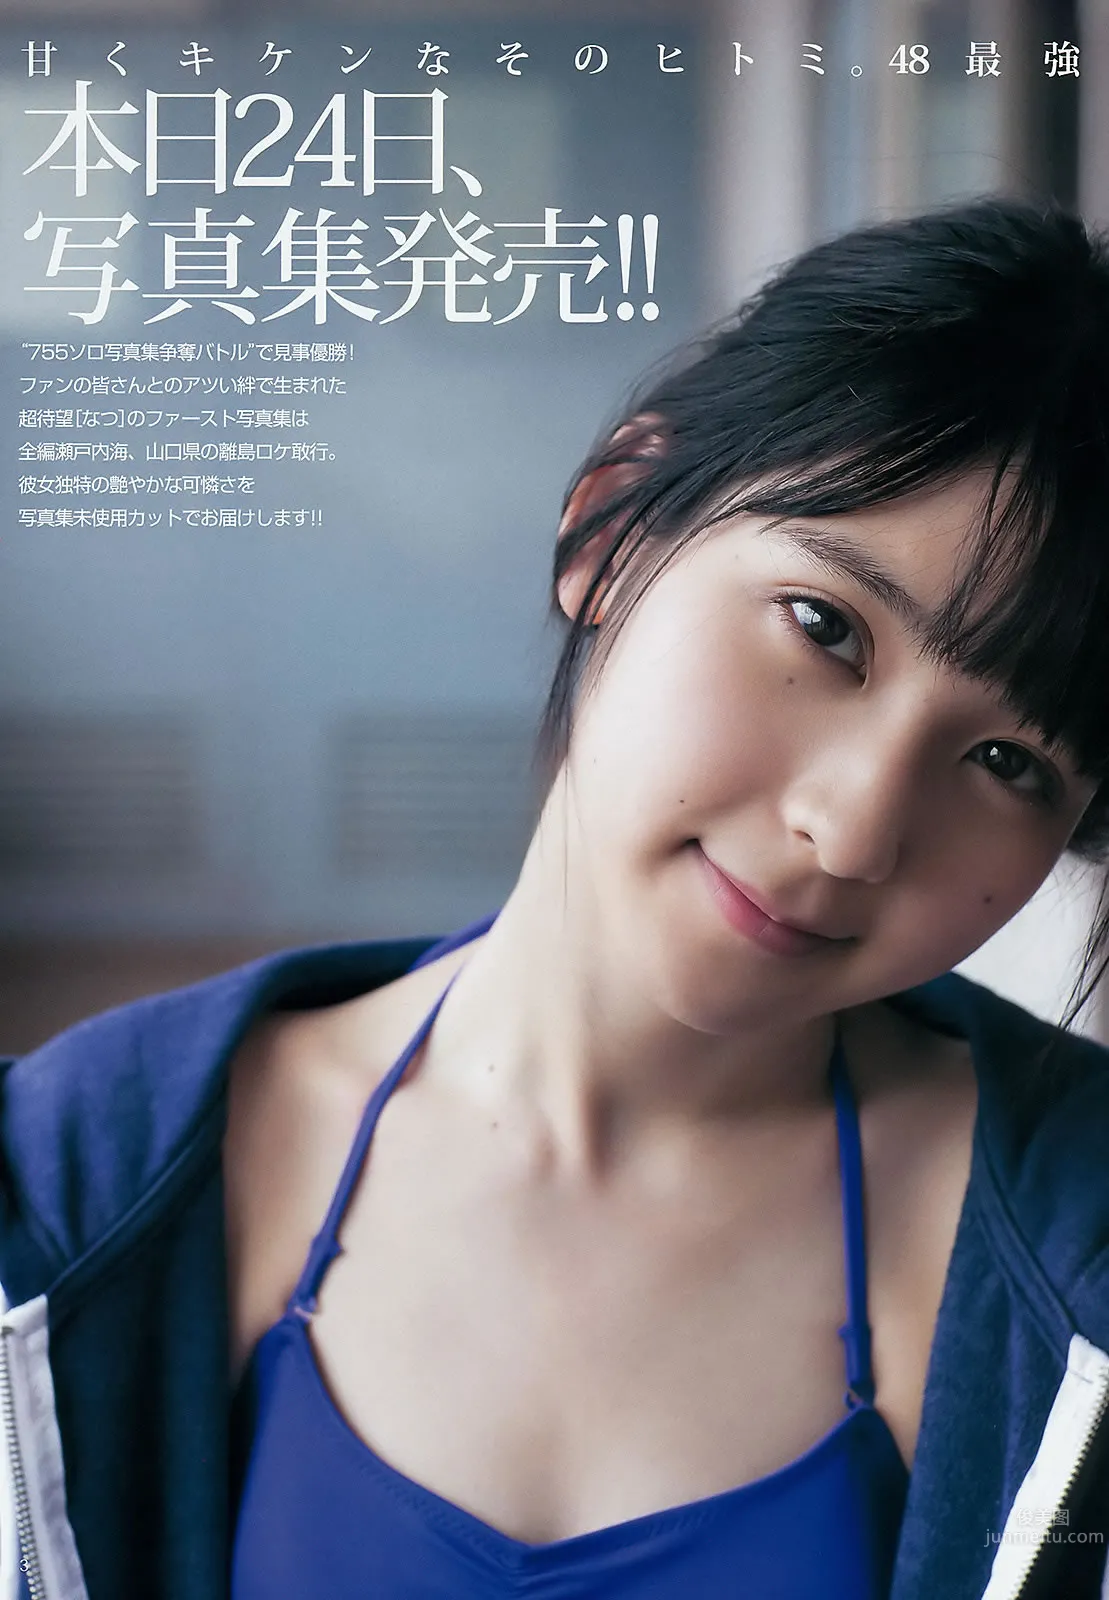 [Weekly Young Jump] 2015 No.42-43 佐藤美希 伊藤しほ乃 松岡菜摘 太田夢莉_5